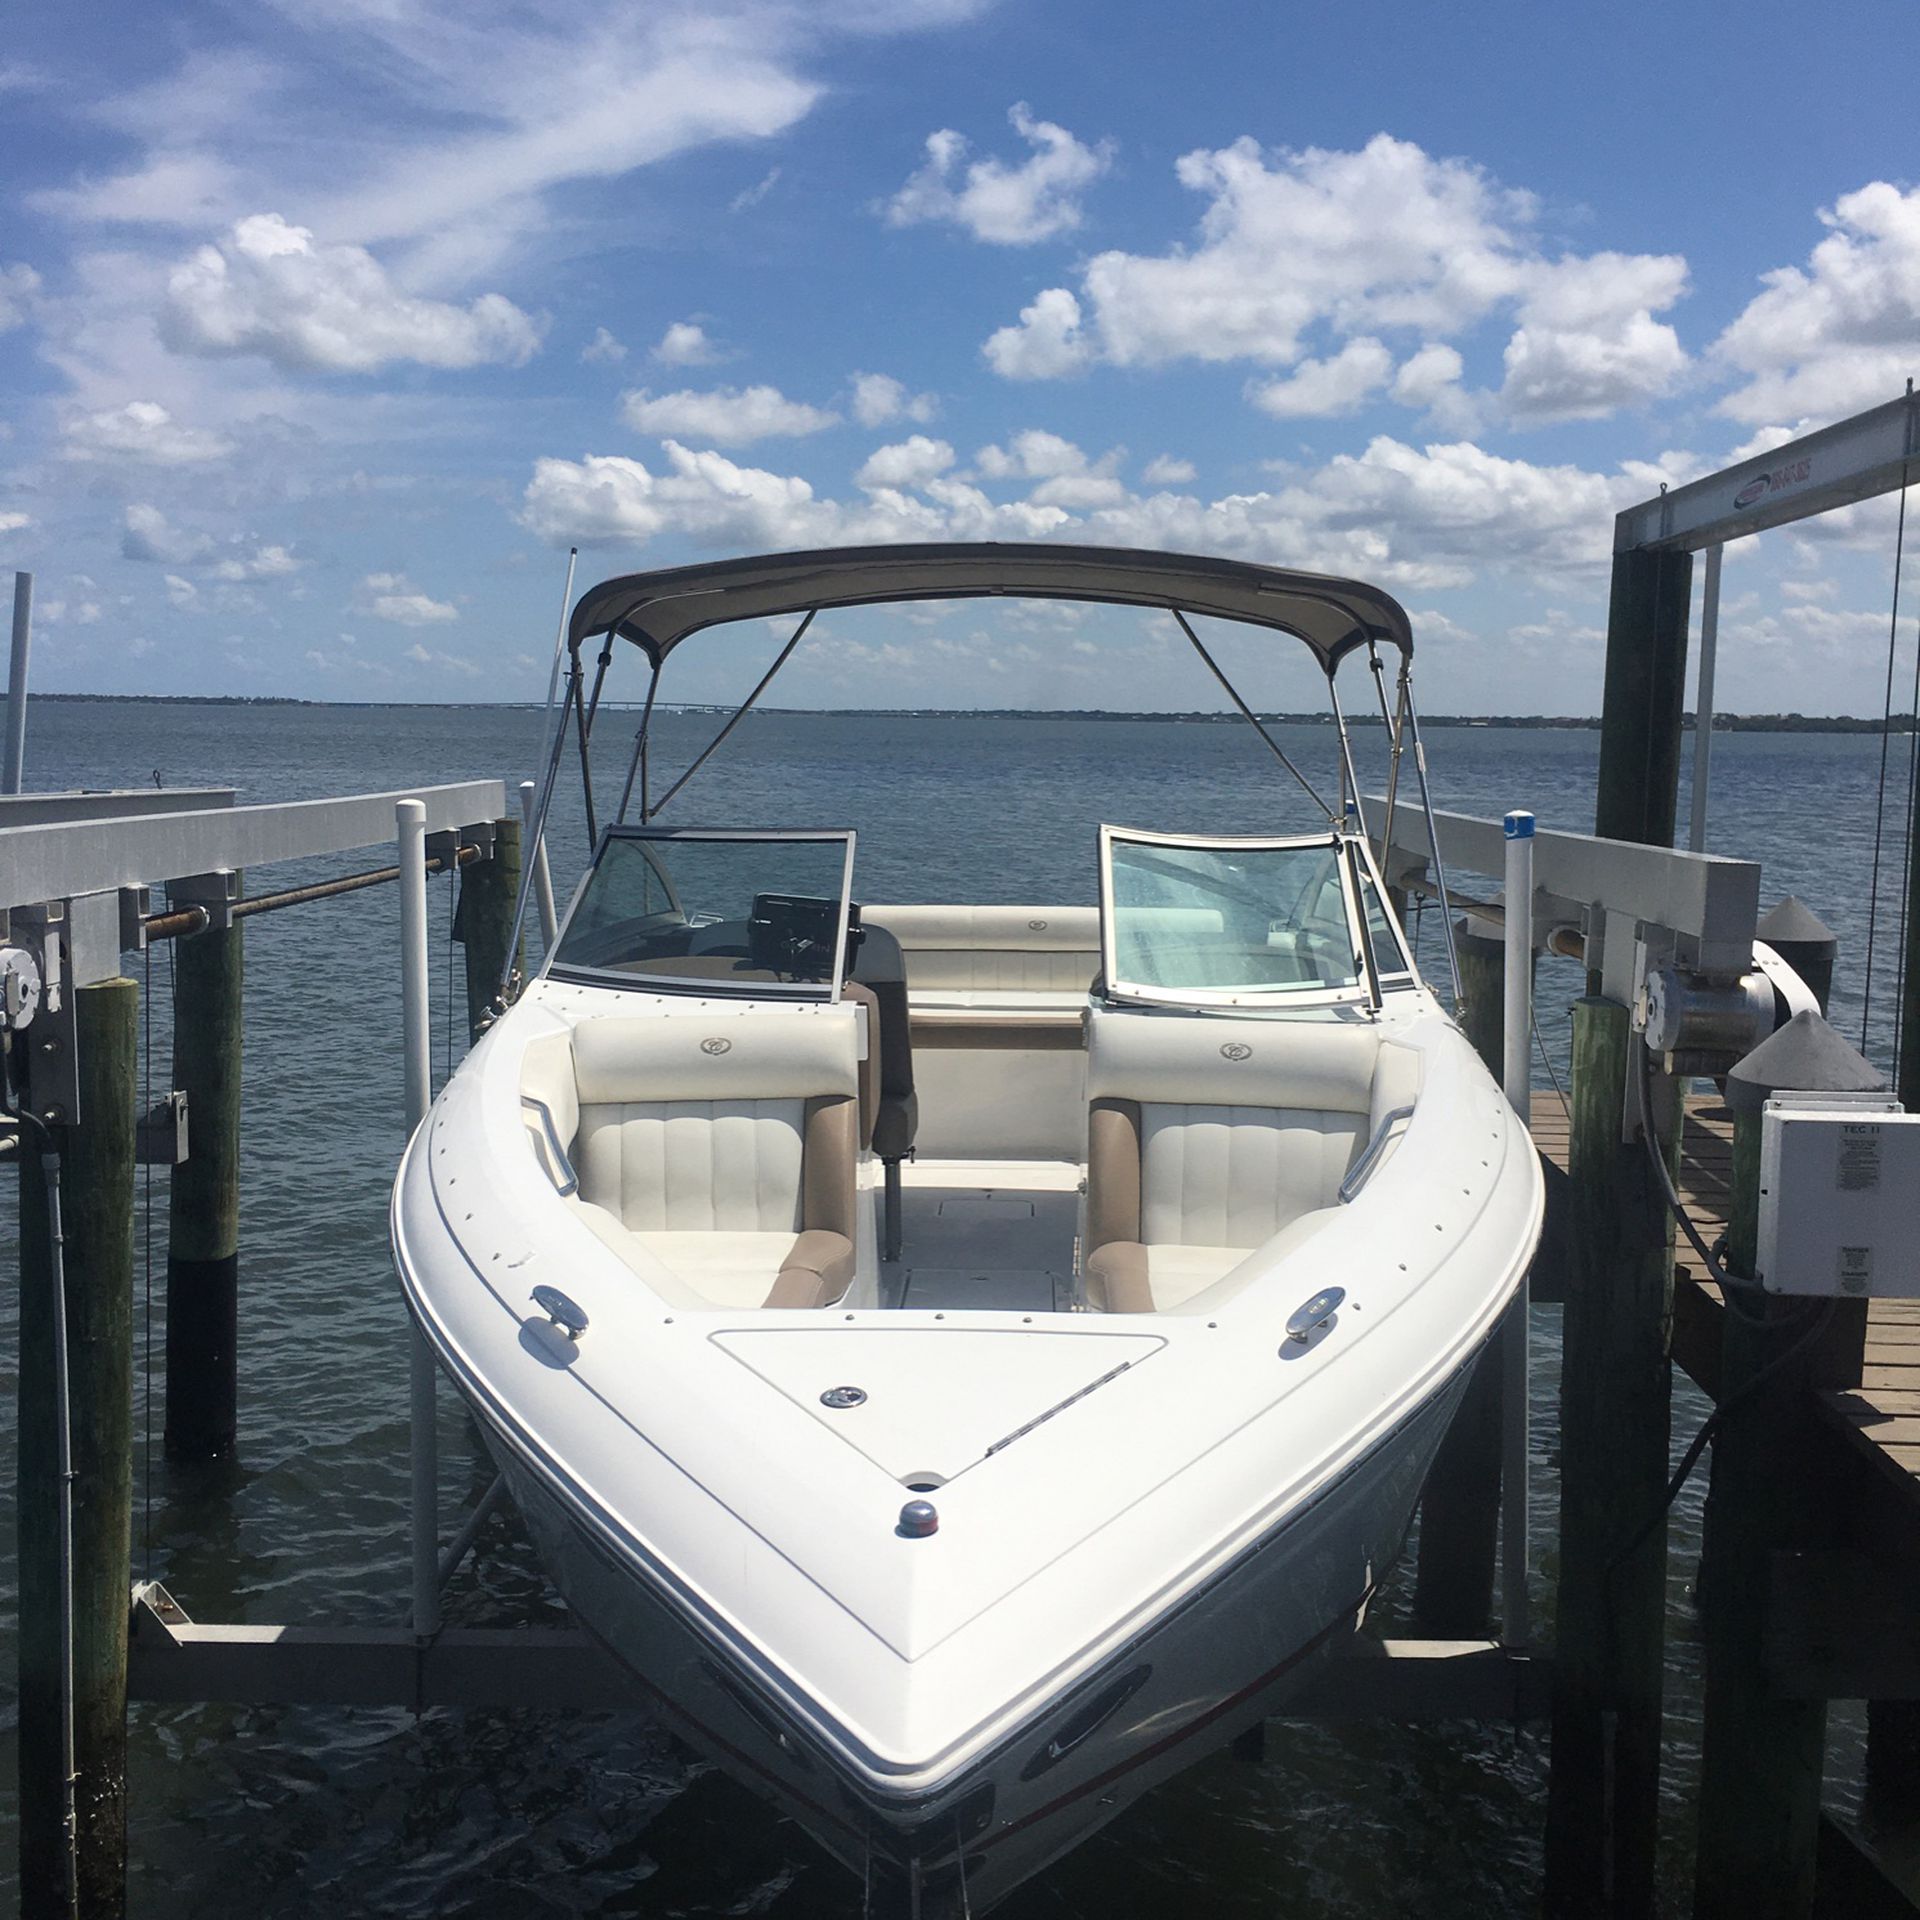 Photo 2013Cobalt 276 White 28 Ft 172 Hours 370 HP Inboard Outboard Motor